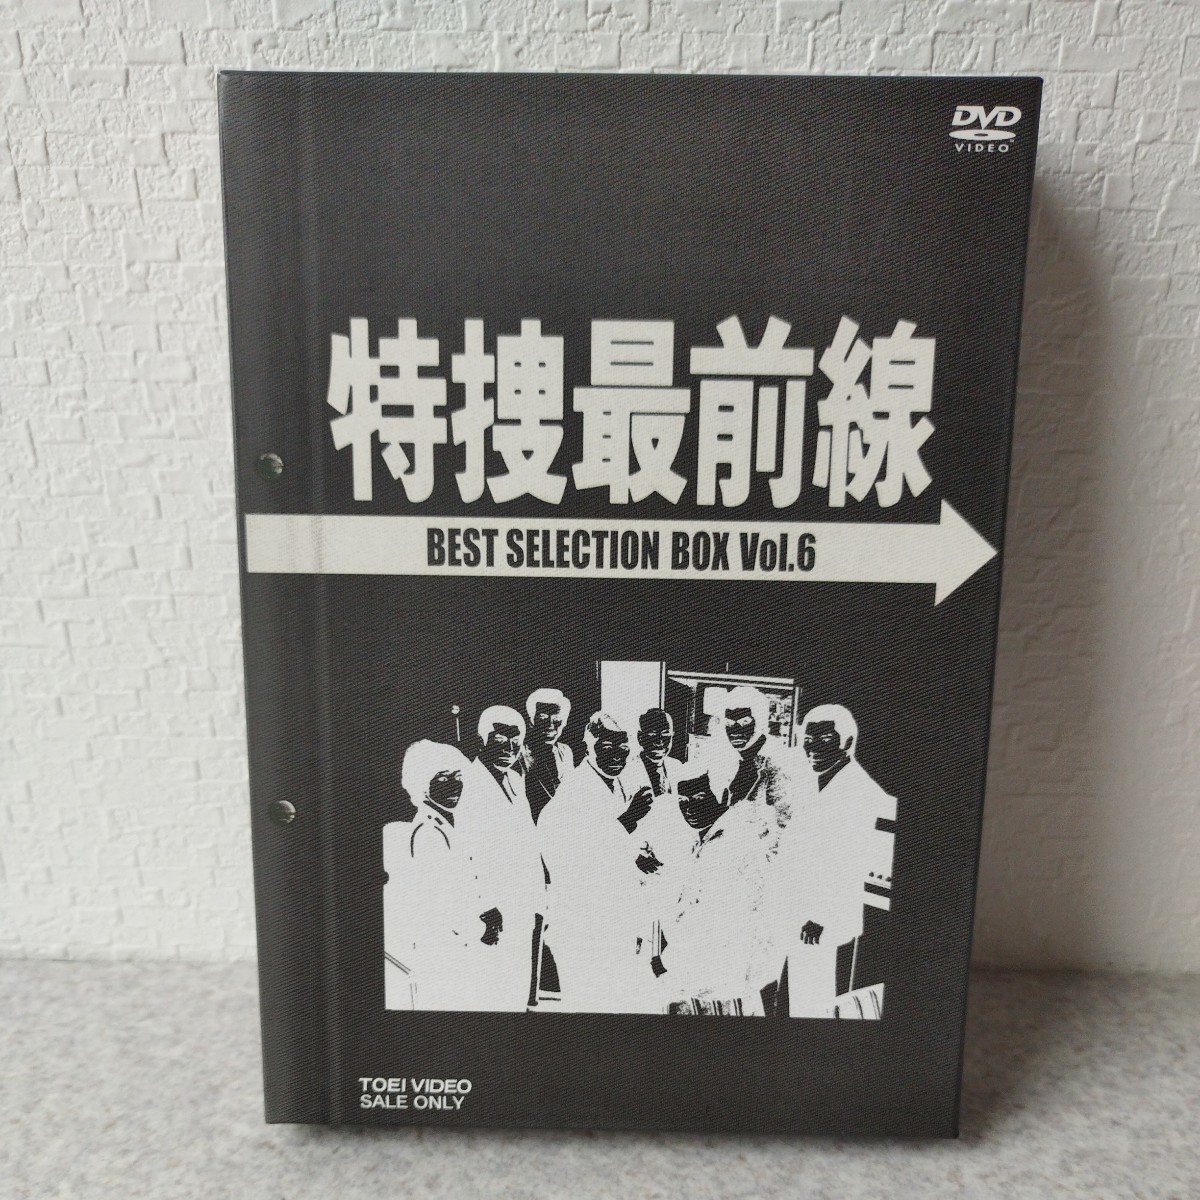  secondhand goods * higashi . Special . most front line DVD the best selection box Vol.6 the first times production limitation 